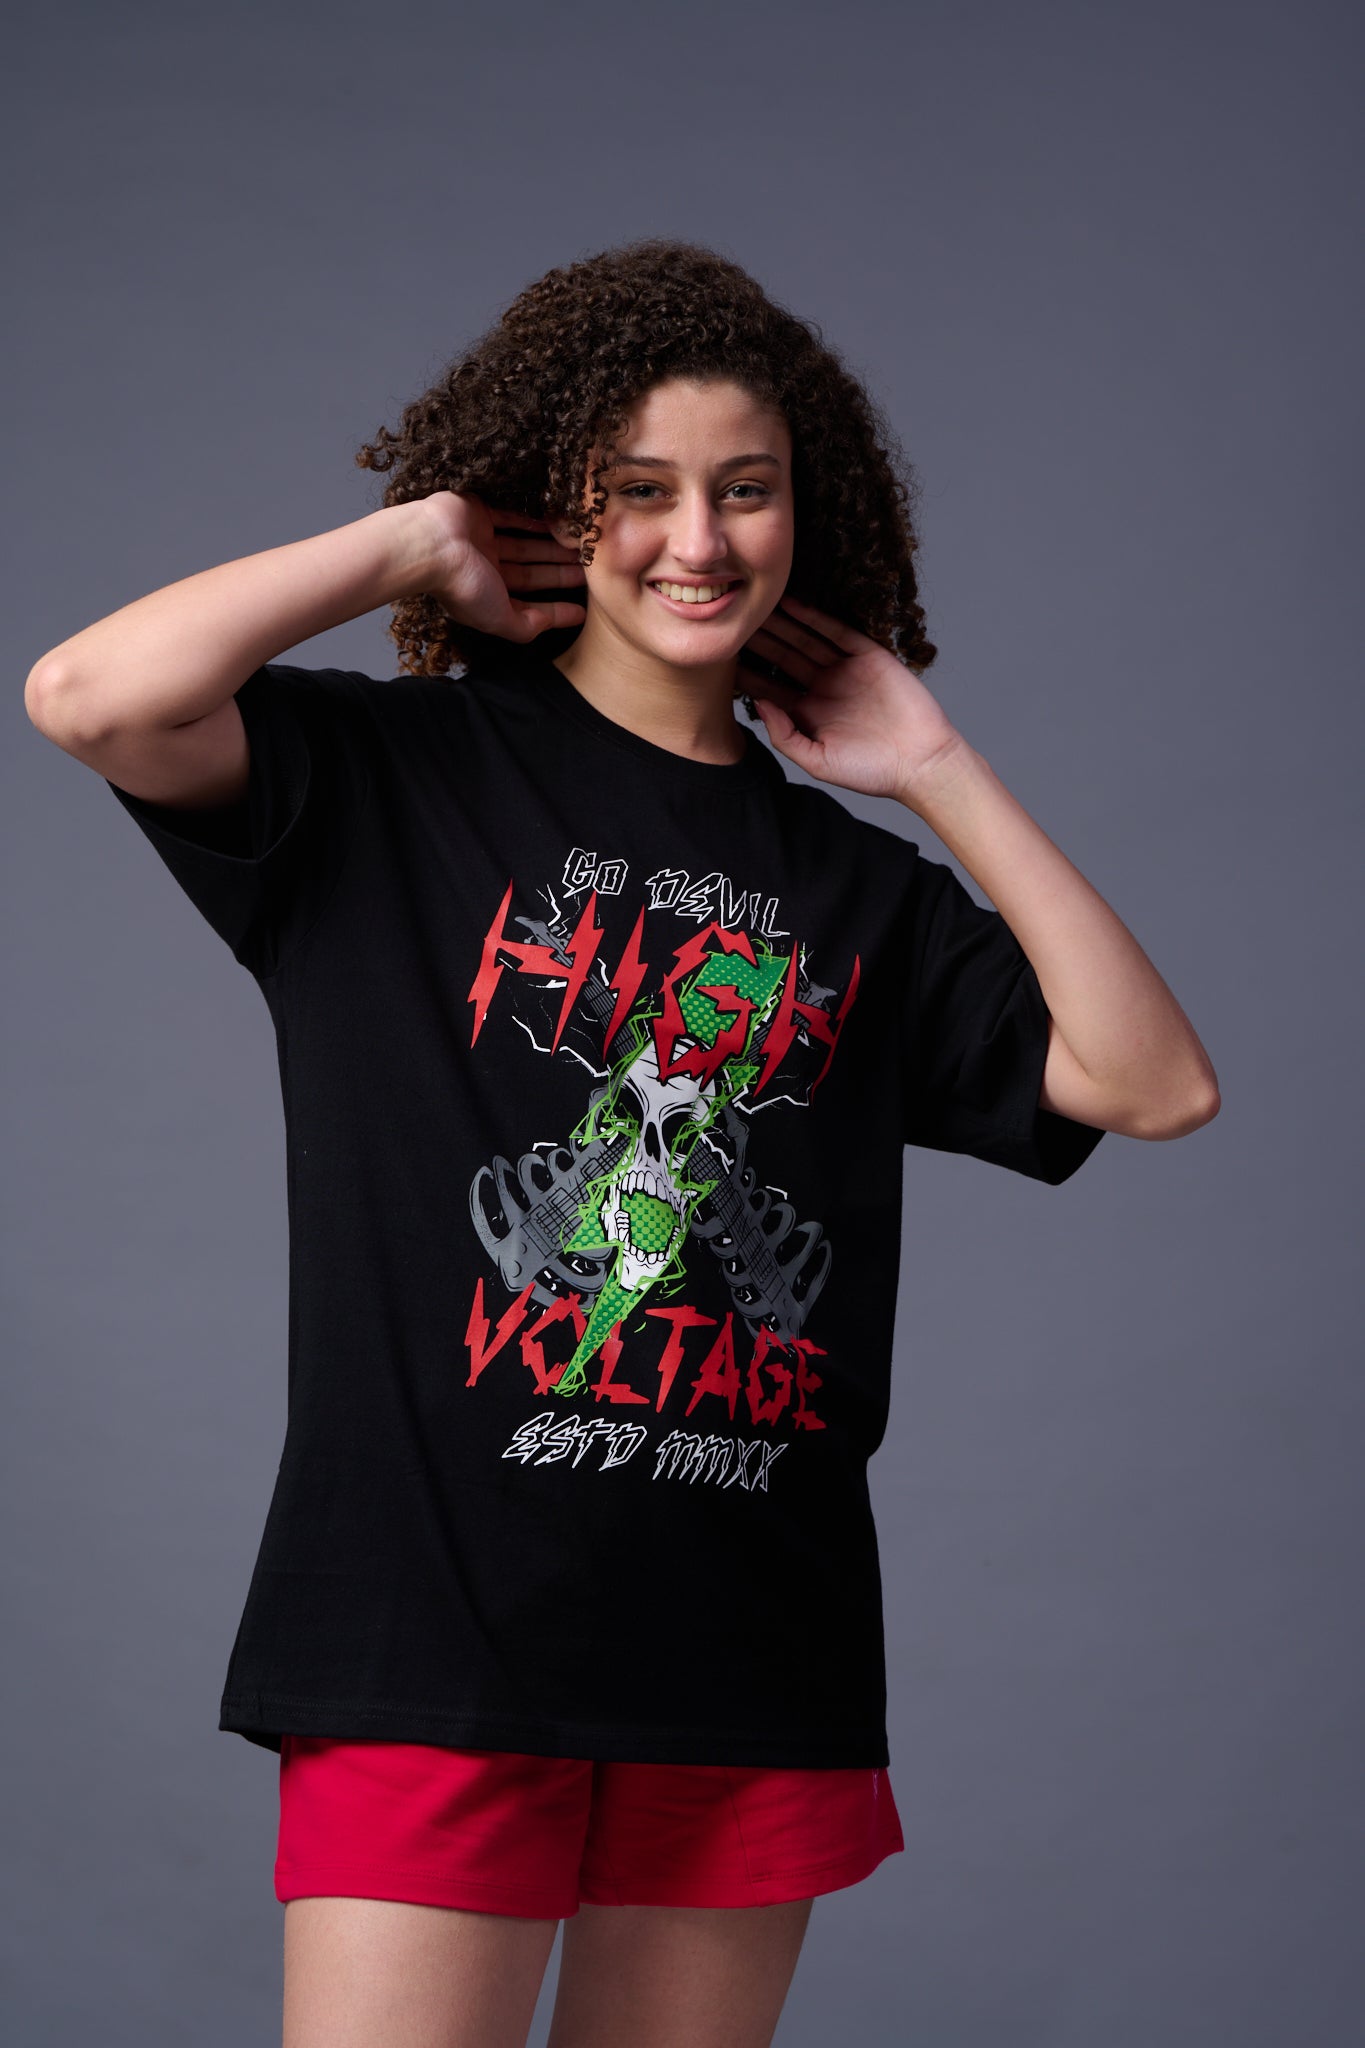 High Voltage Printed Black Oversized T-Shirt for Women